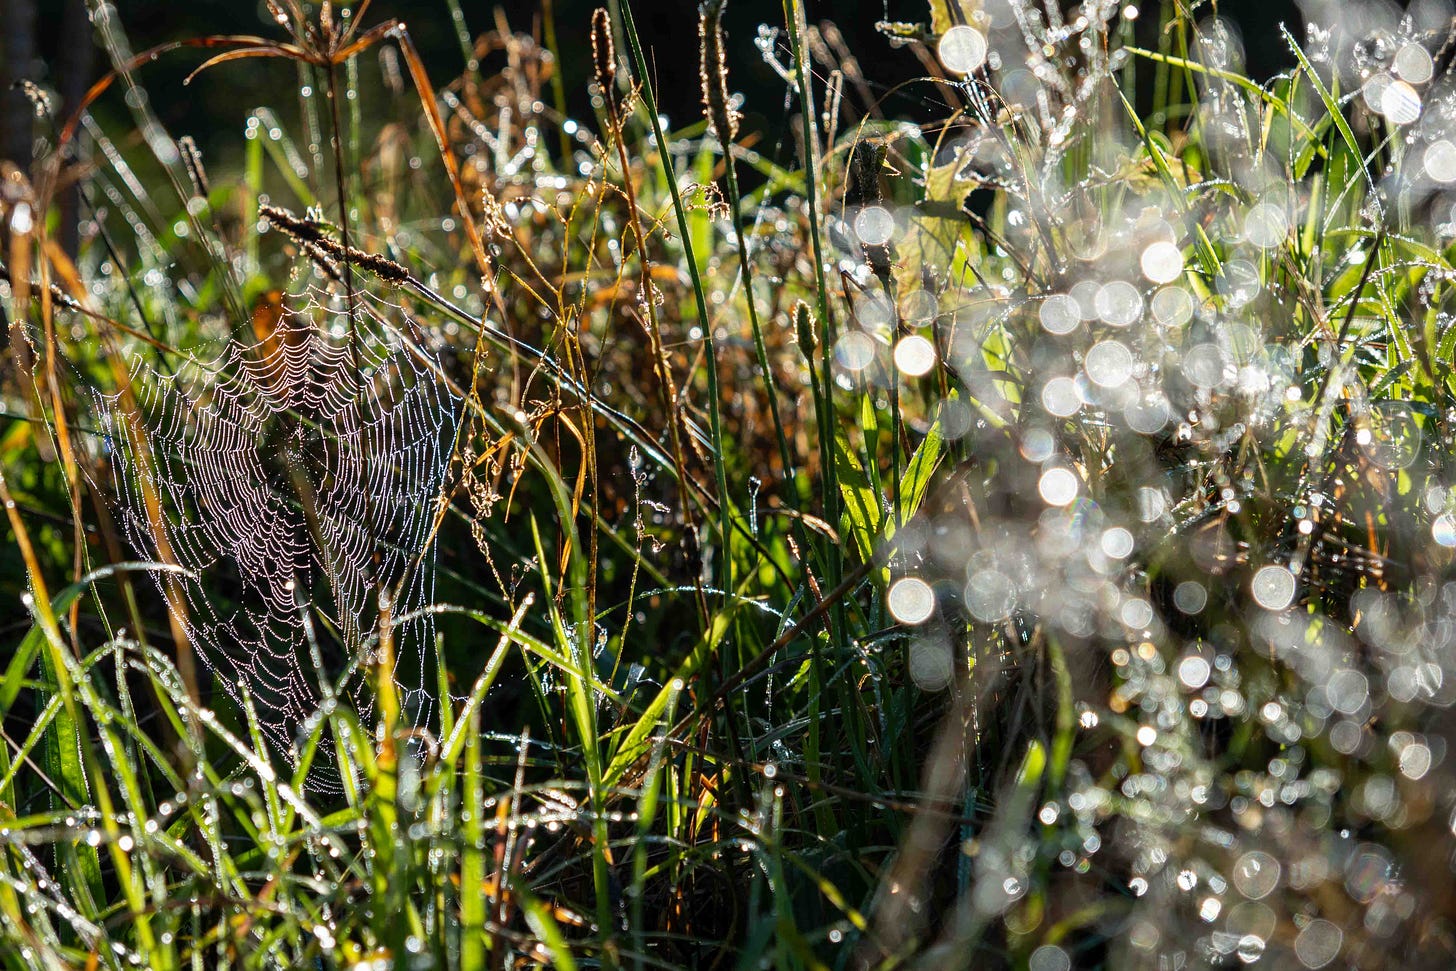 dew covered grass with spider web in the morning light